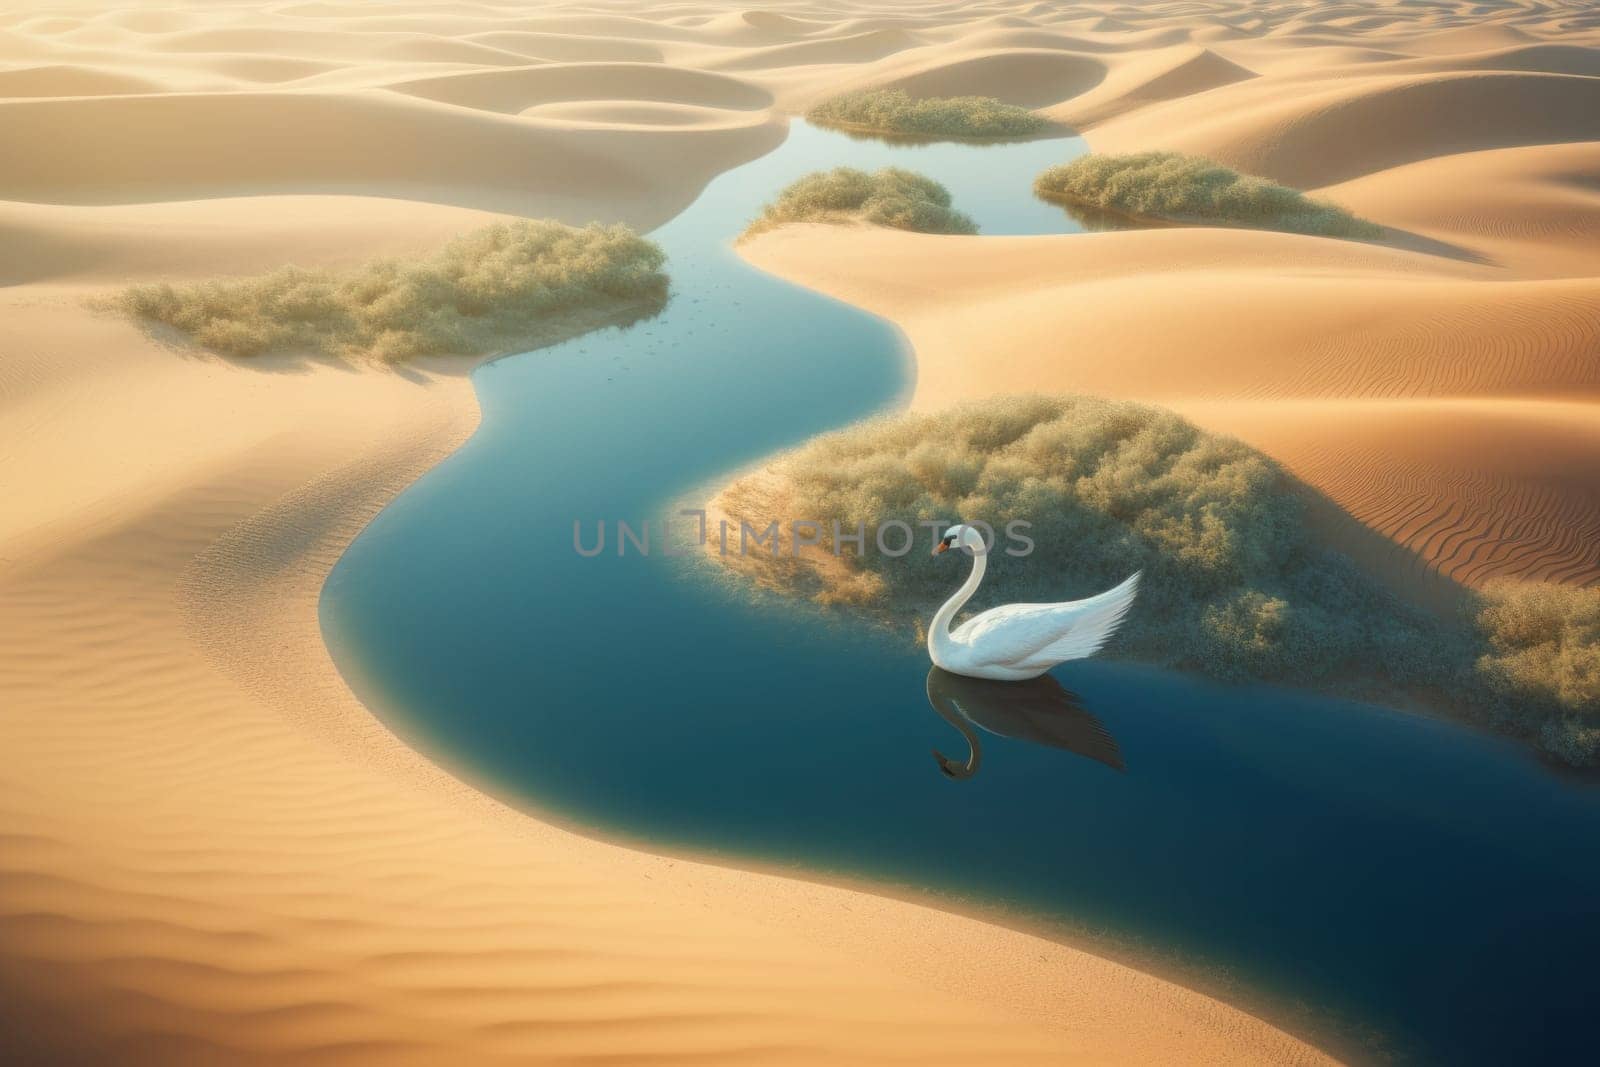 A swan is swimming in a river in the desert